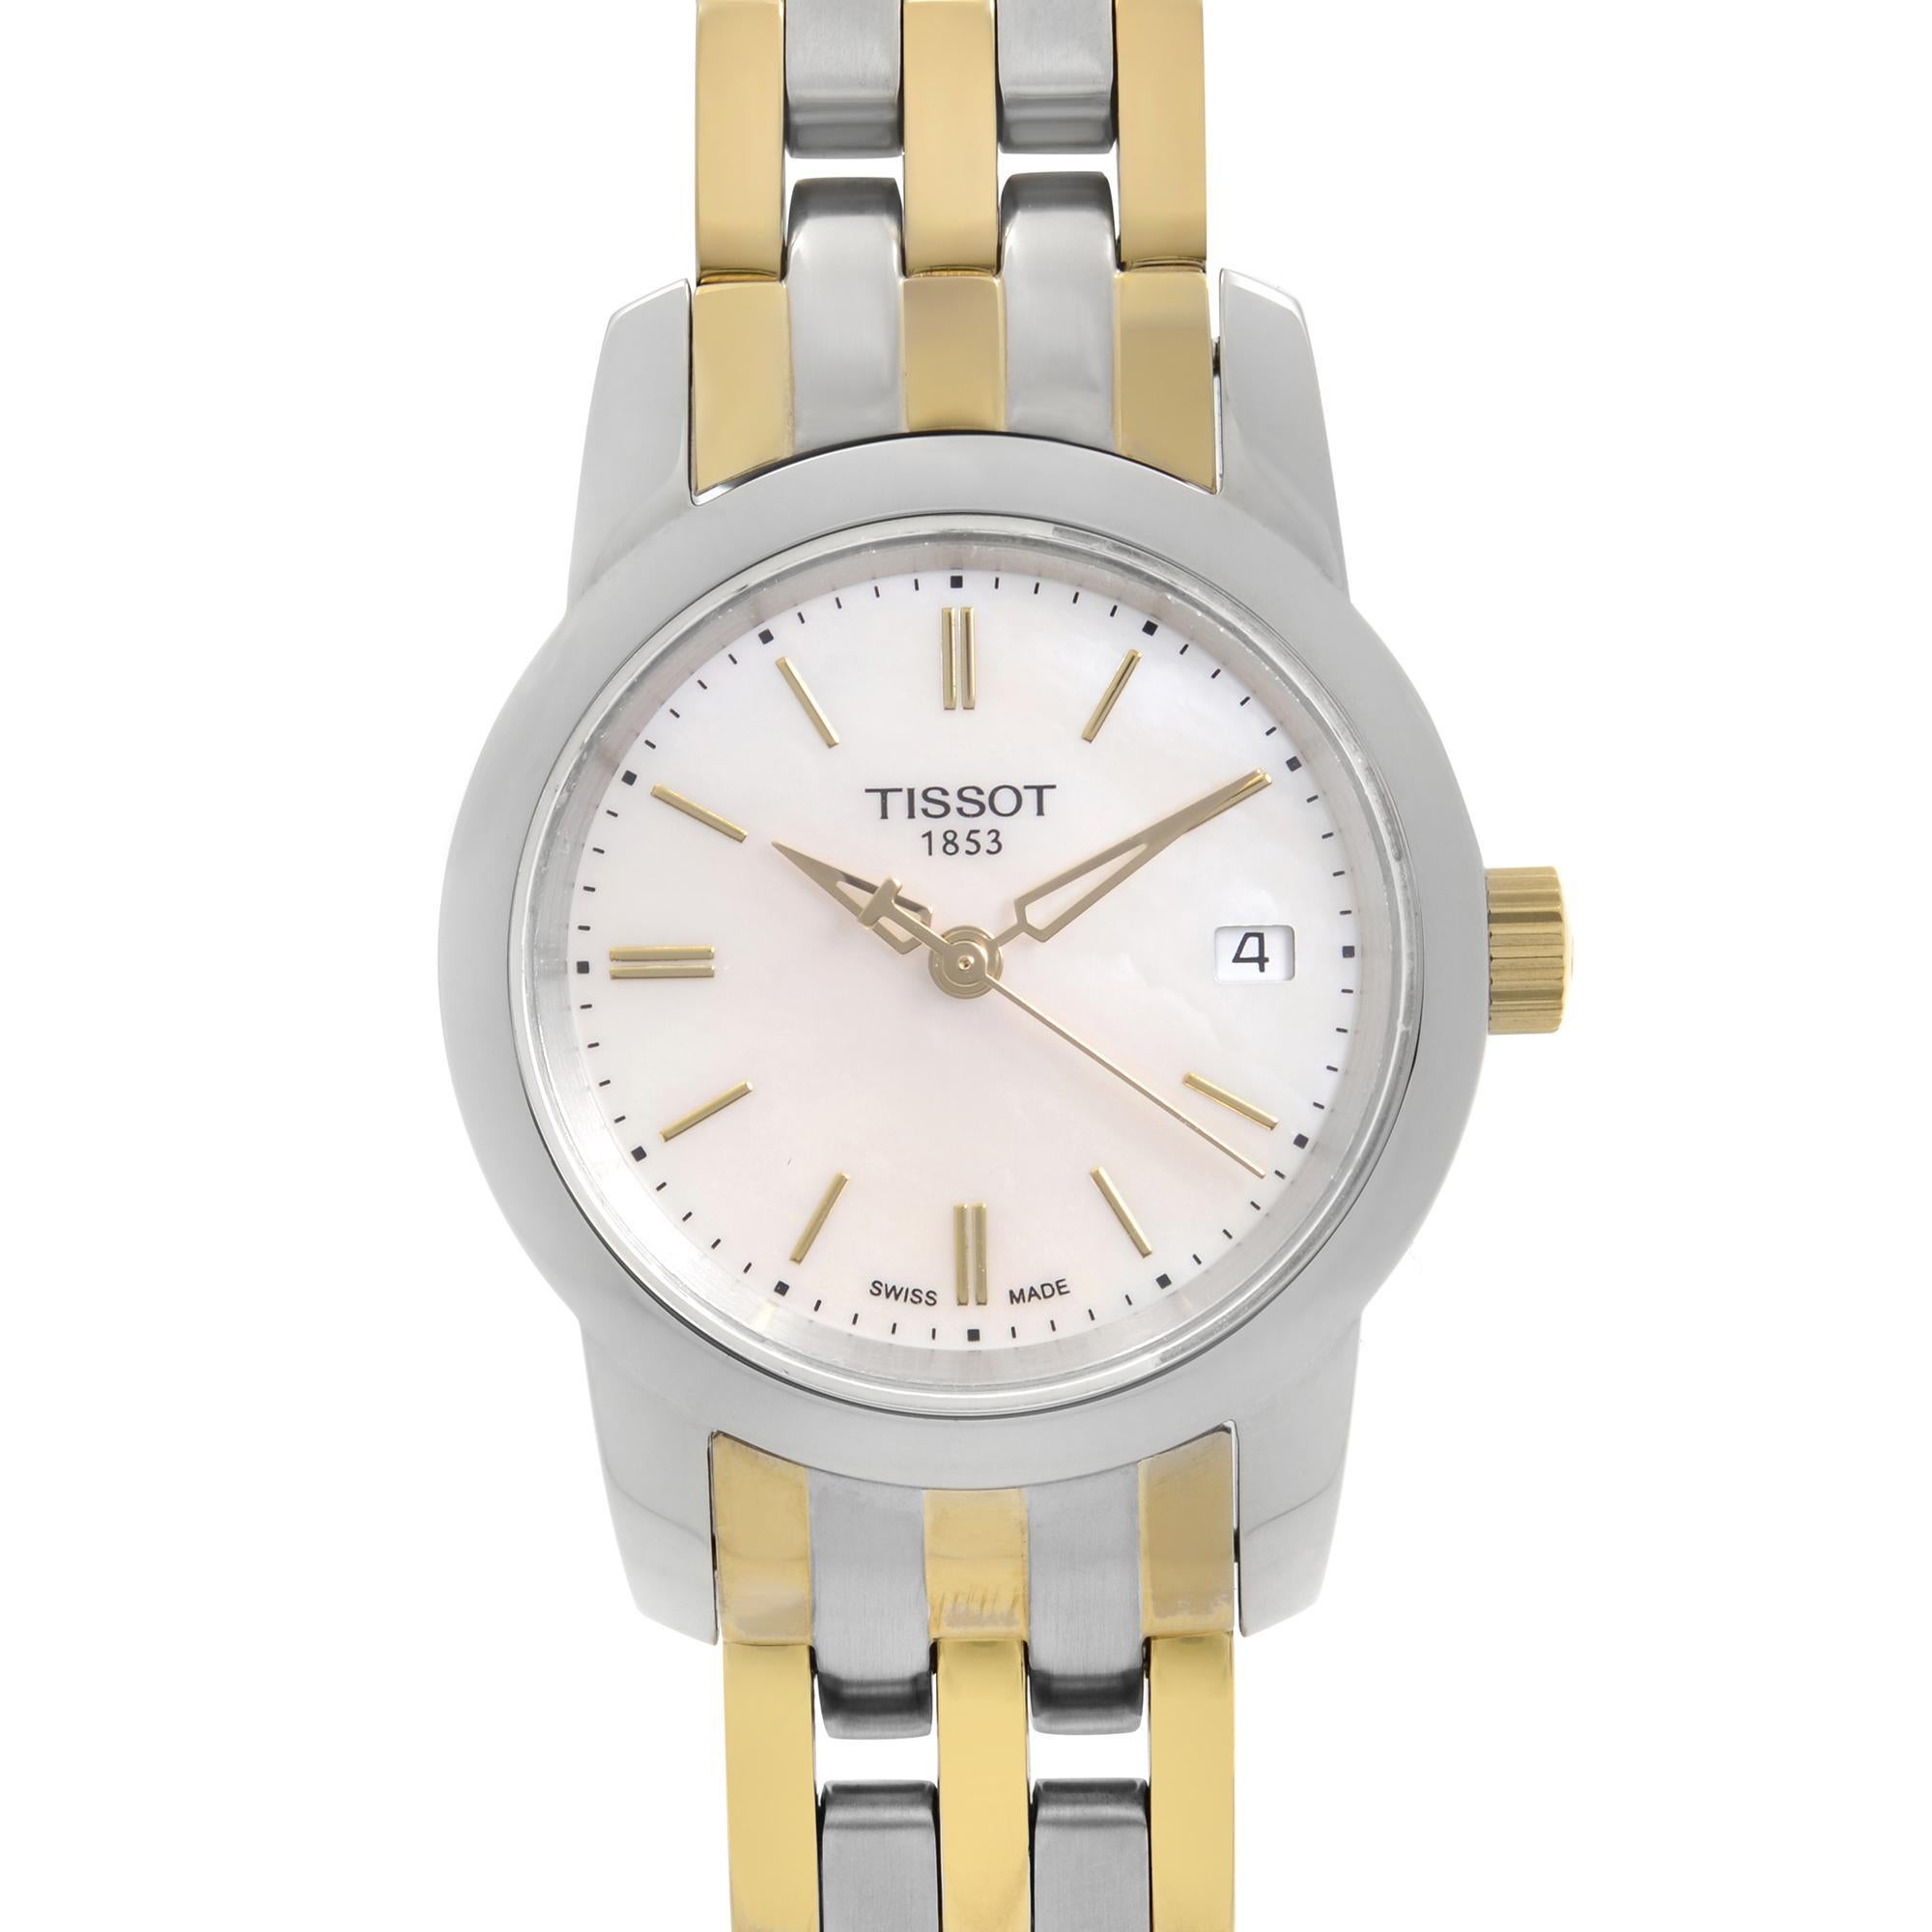 Preowned mint Tissot Classic Dream 28mm Stainless Steel Mother of Pearl Dial Ladies Quartz Watch T033.210.22.111.00. The watch was never owned but has Minor scuffs and scratches on the Gold-Tone links on the Bracelet visible Under closer Inspection